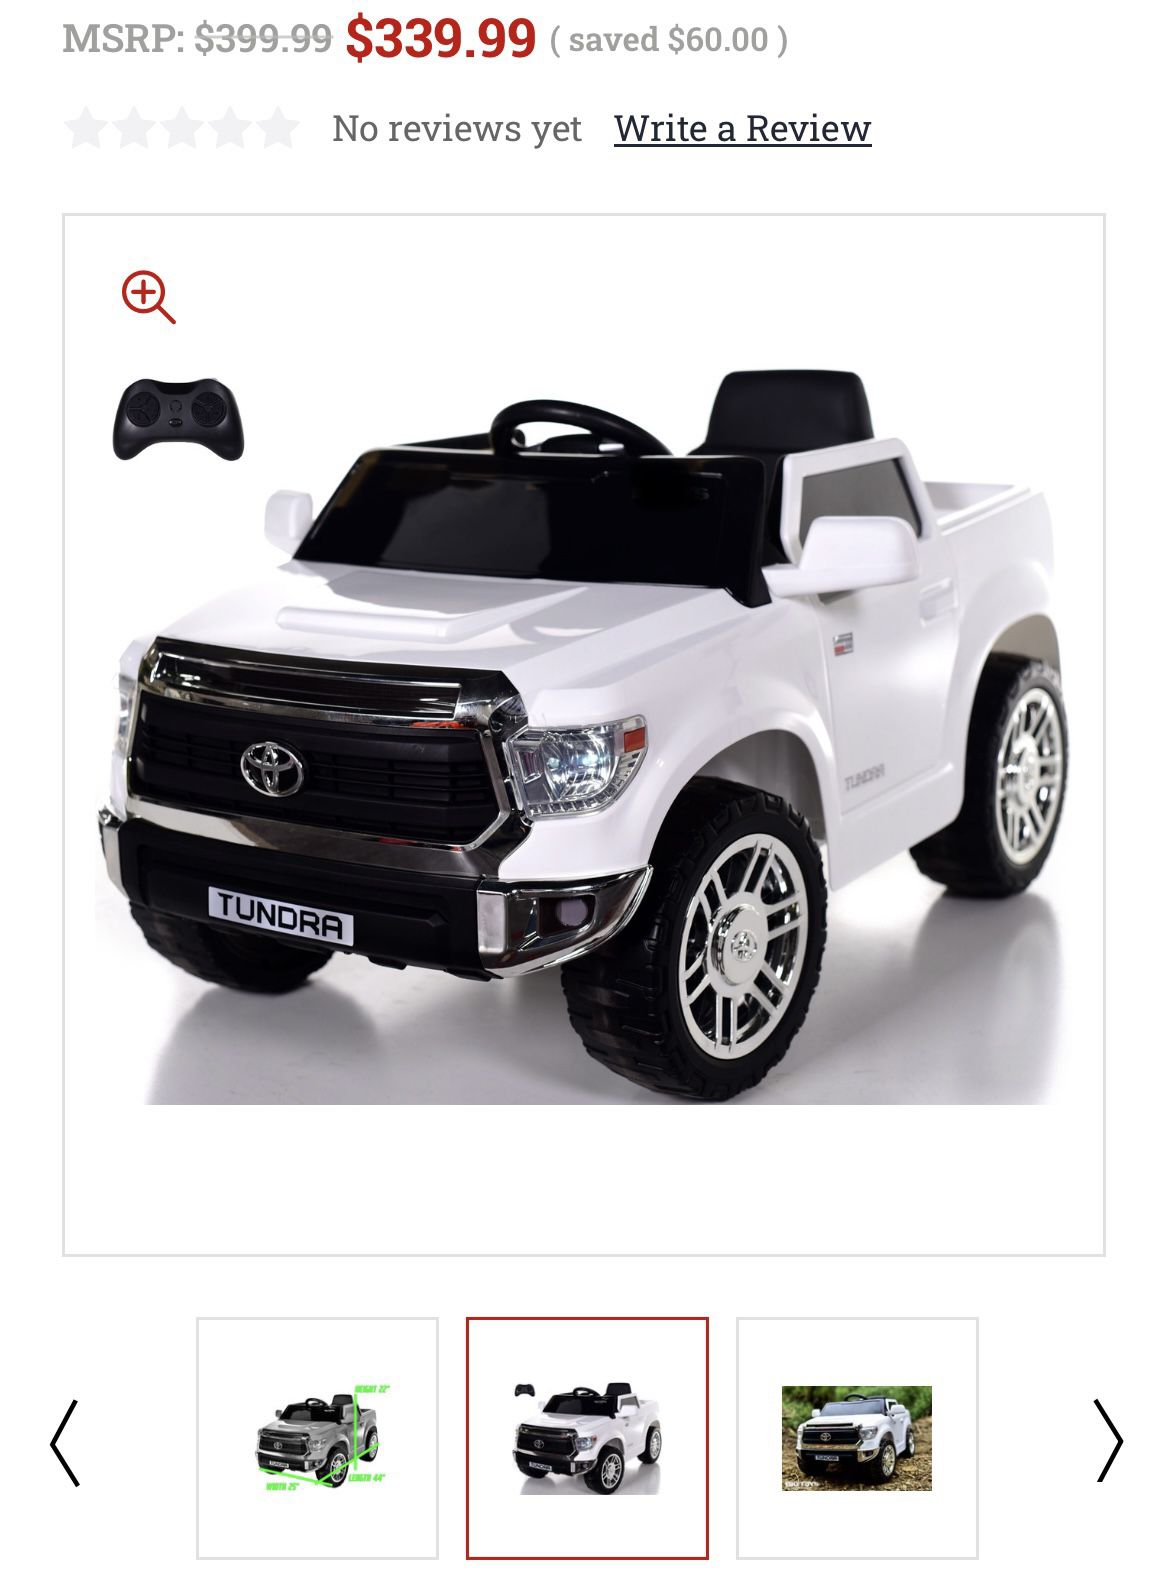 ⚪️⚪️!!BRAND NEW 12V LUXURY REMOTE CONTROL Electric Kid Ride On Car Power Wheels Toyota TUNDRA with LEDs, Media Player, USB And Mp3 